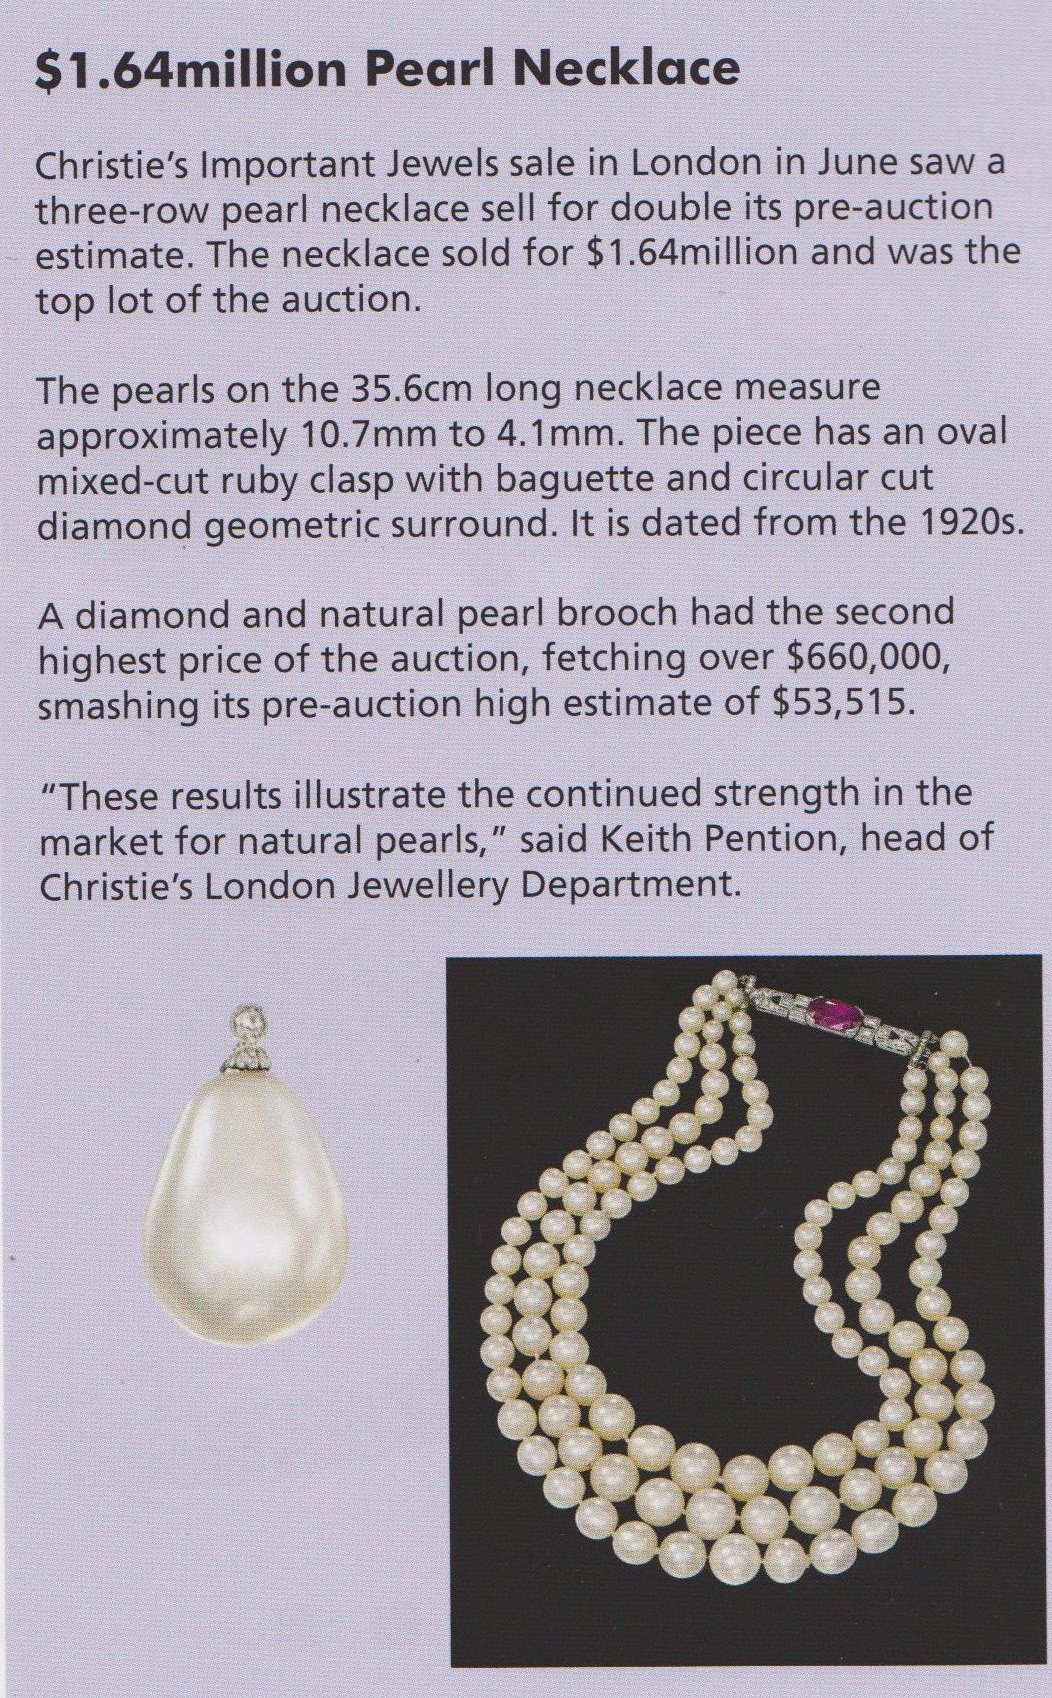 Christie’s of London Jewel sale in June fetched 1.64 M for a pearl necklace